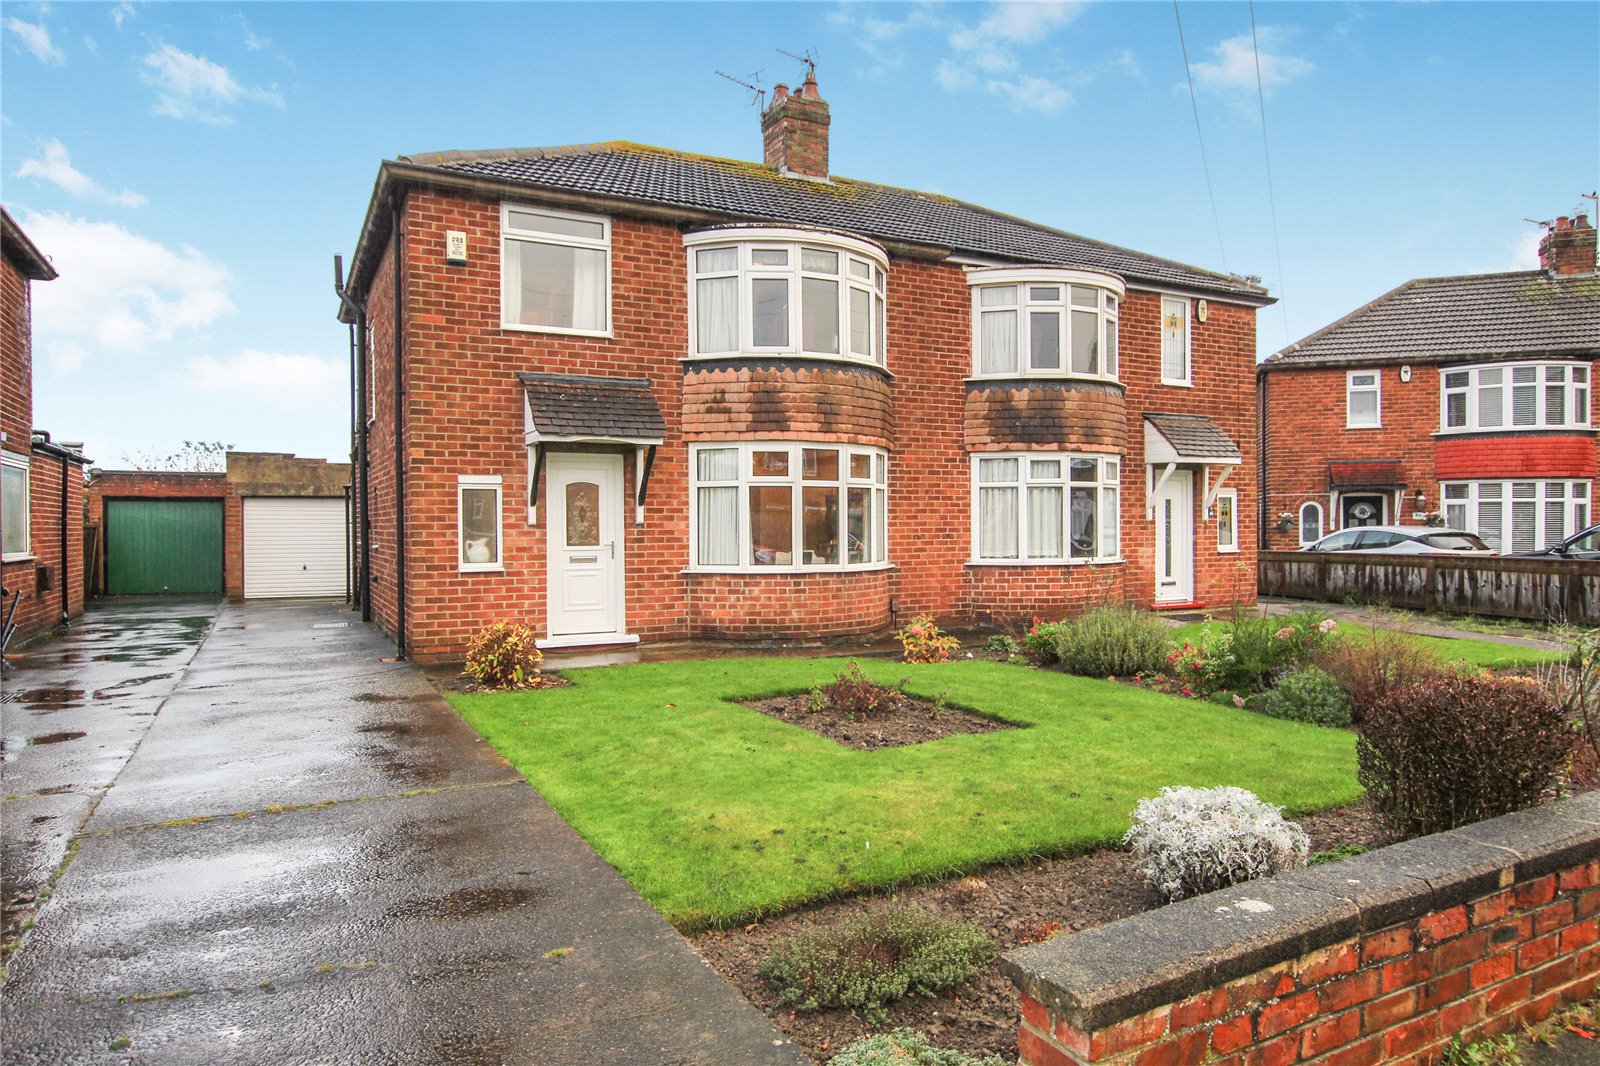 3 bed house for sale in Stanhope Grove, Acklam 1